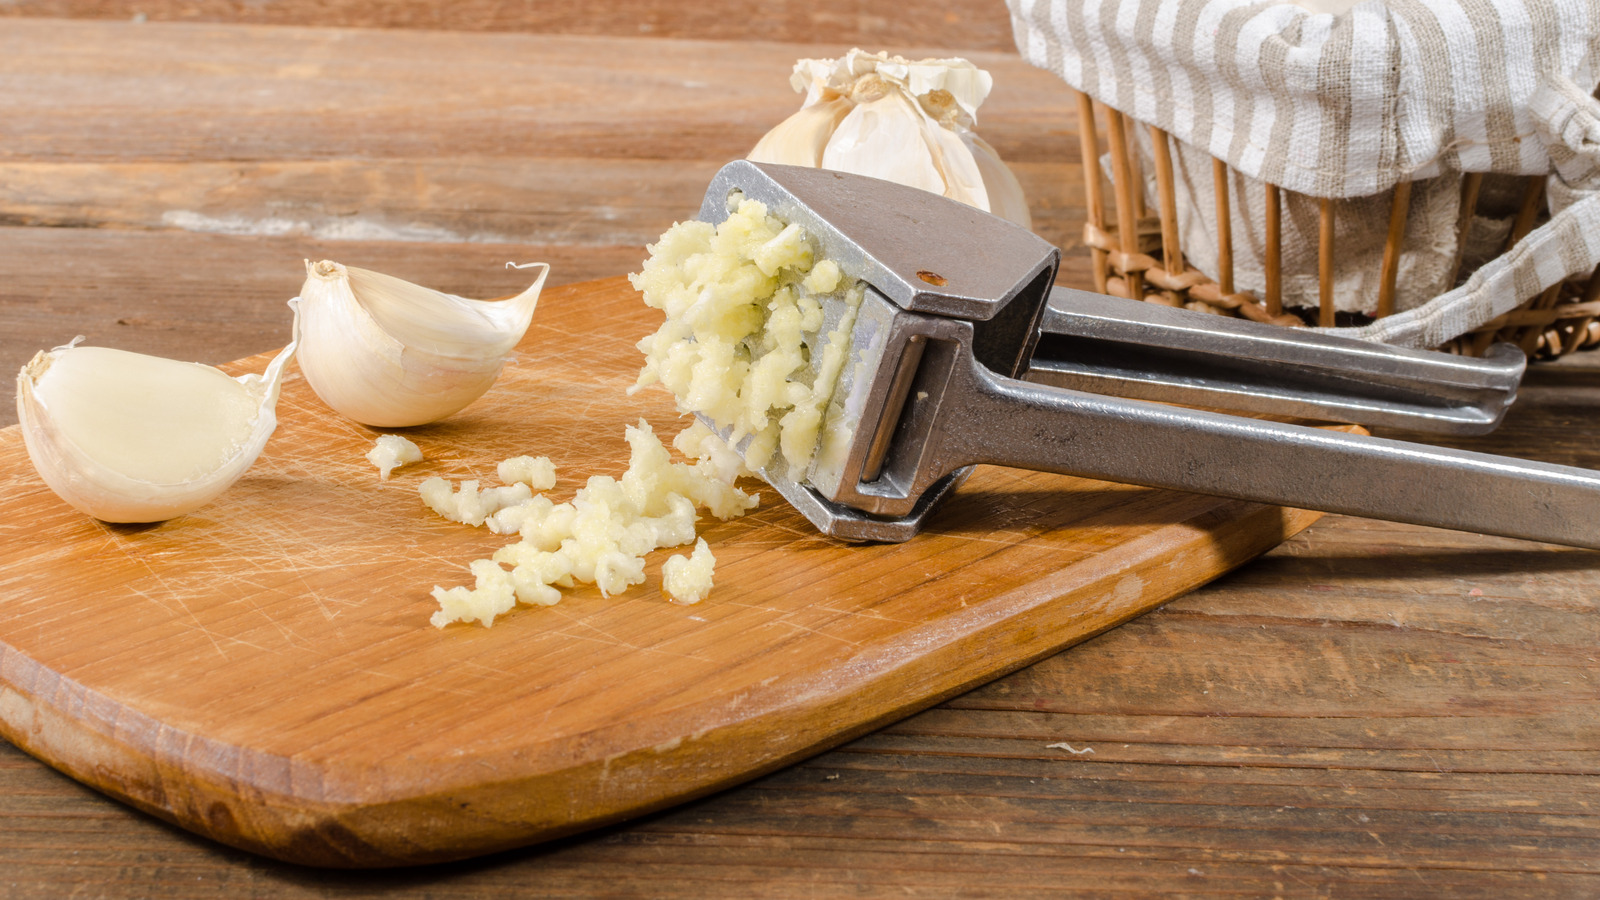 https://www.thedailymeal.com/img/gallery/10-mistakes-everyone-makes-when-using-a-garlic-press/l-intro-1702558941.jpg